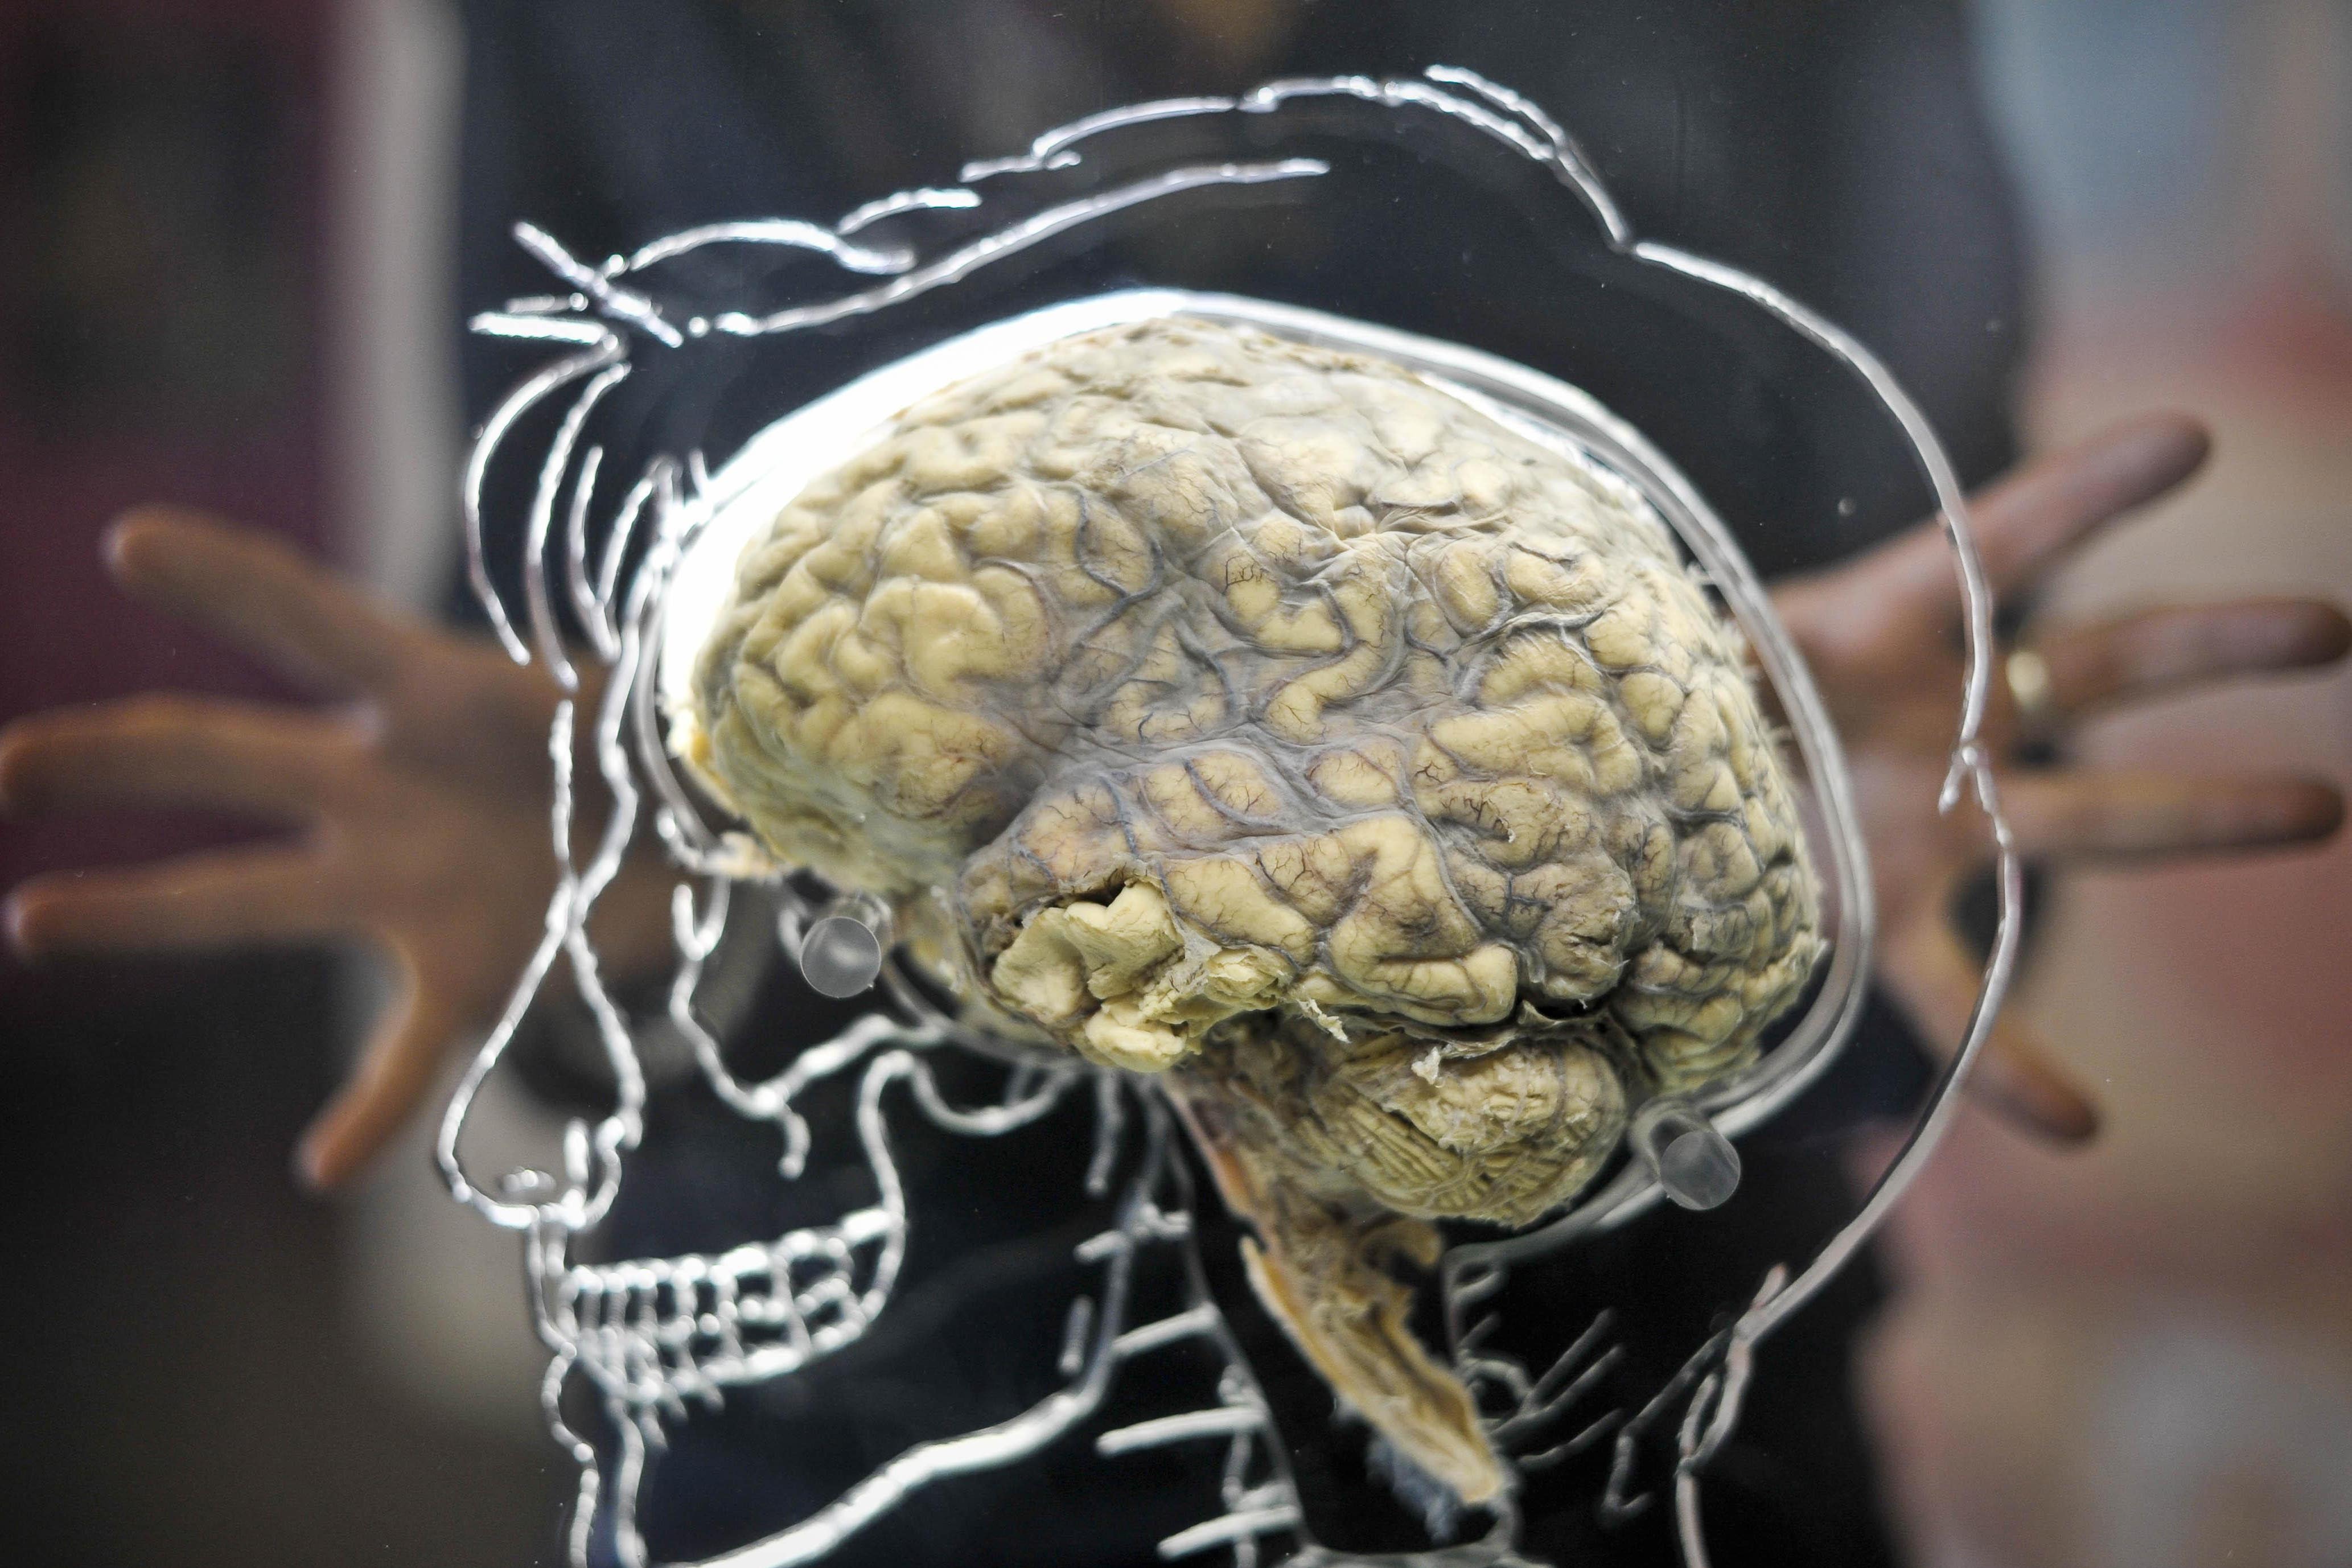 Researchers said it is important to note that the risk of developing a brain cancer is overall low so, even after an injury, the risk remains modest (Ben Birchall/PA)